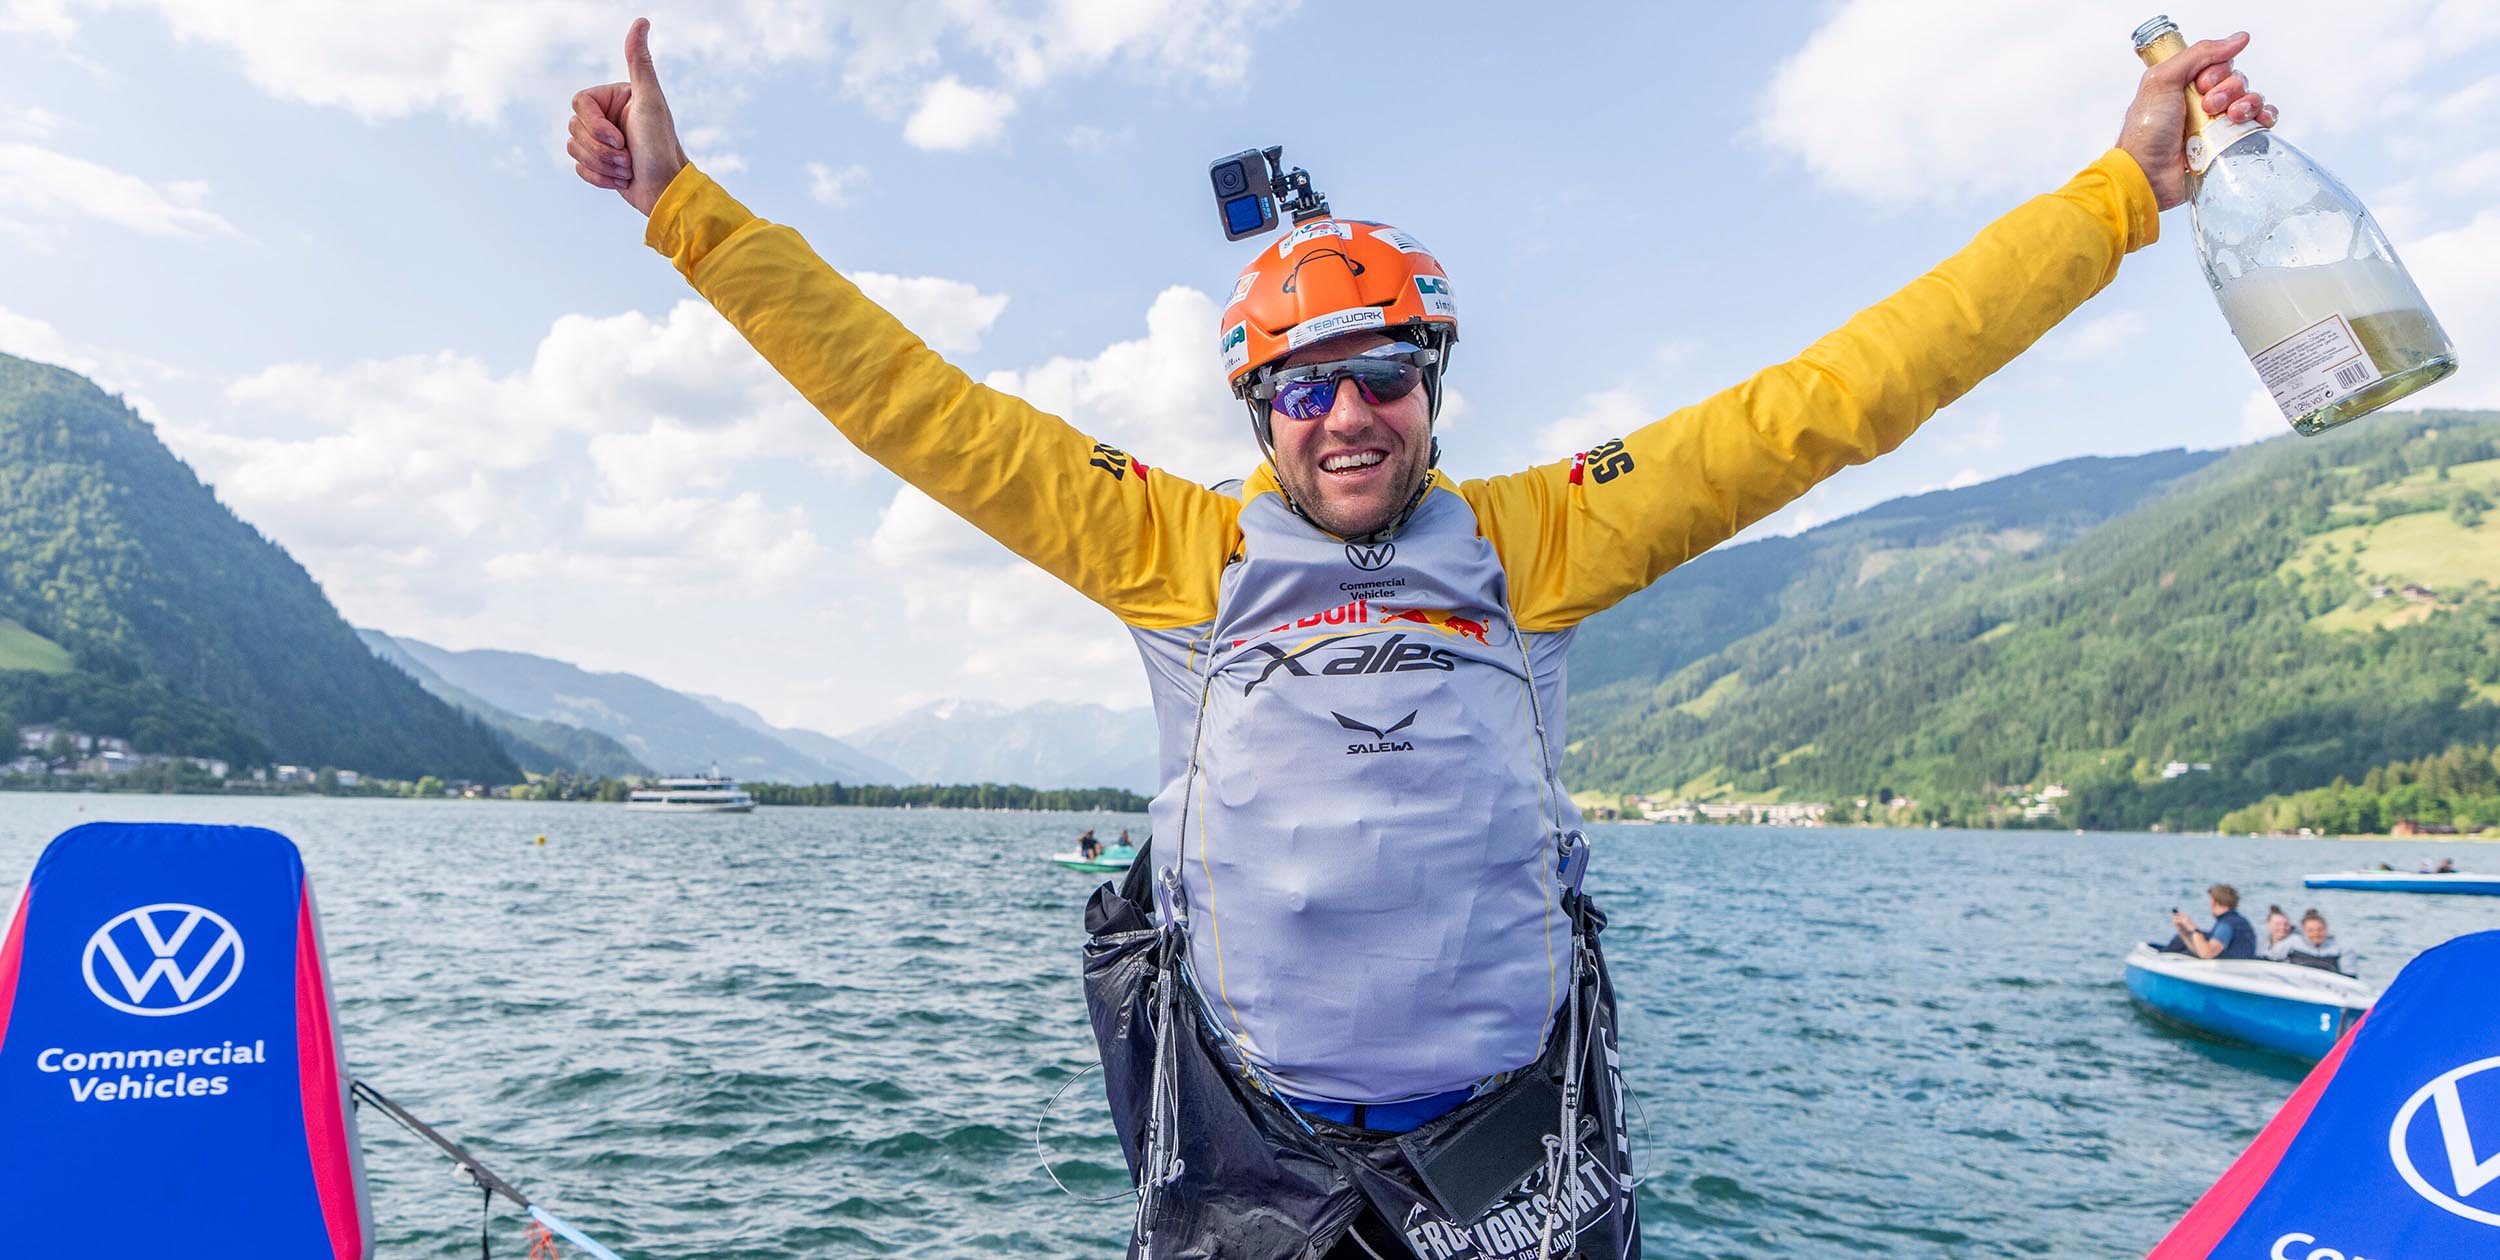 Chrigel Maurer on the raft in Zell am See after winning the 2023 Red Bull X-Alps in record time. Photo: Christian Lorenz / Red Bull Content Pool